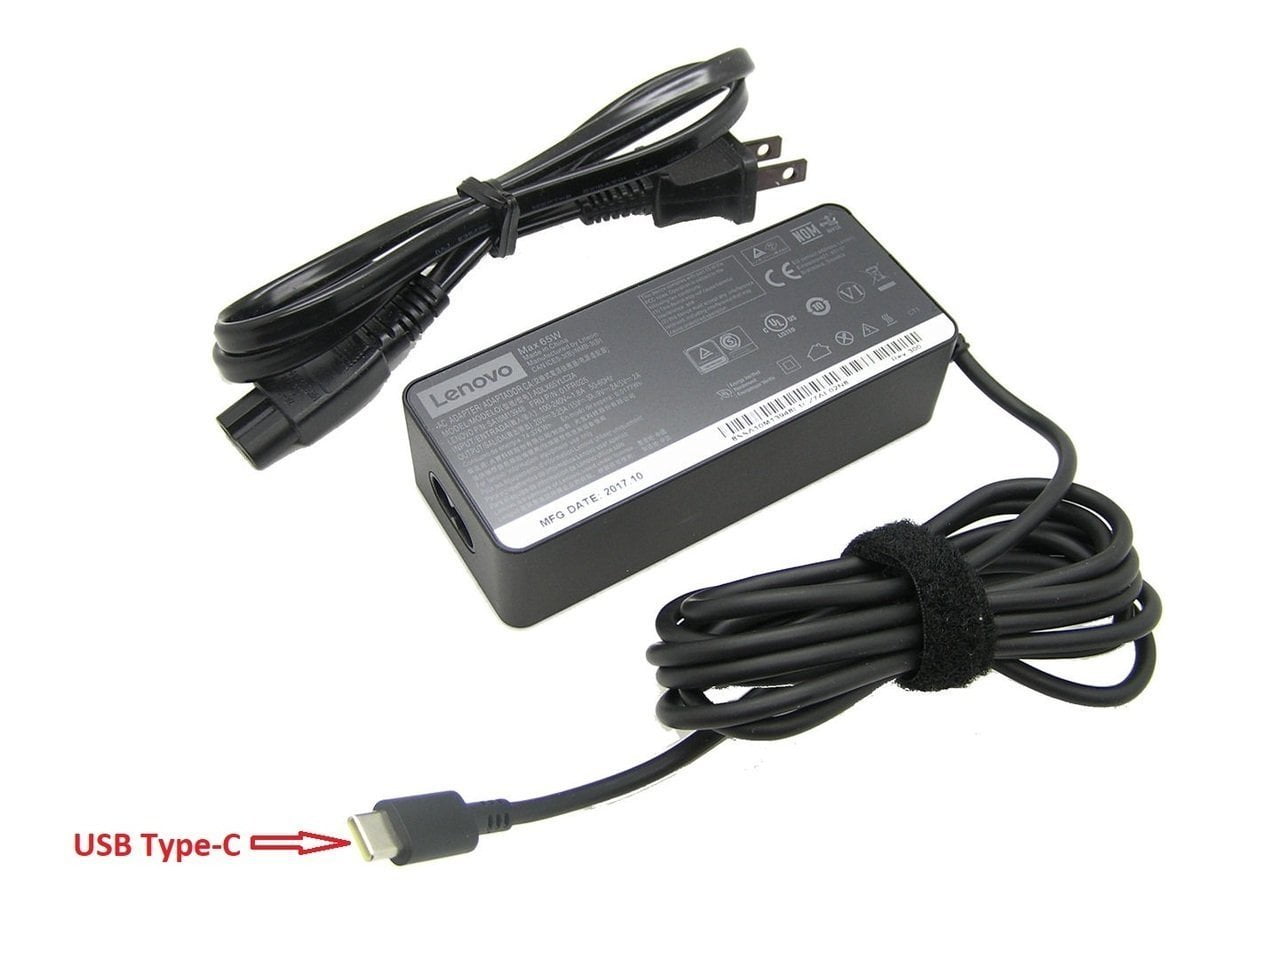 iGo Notebook Tip #206 for WallMax Netbook Chargers latest model EverywhereMax 